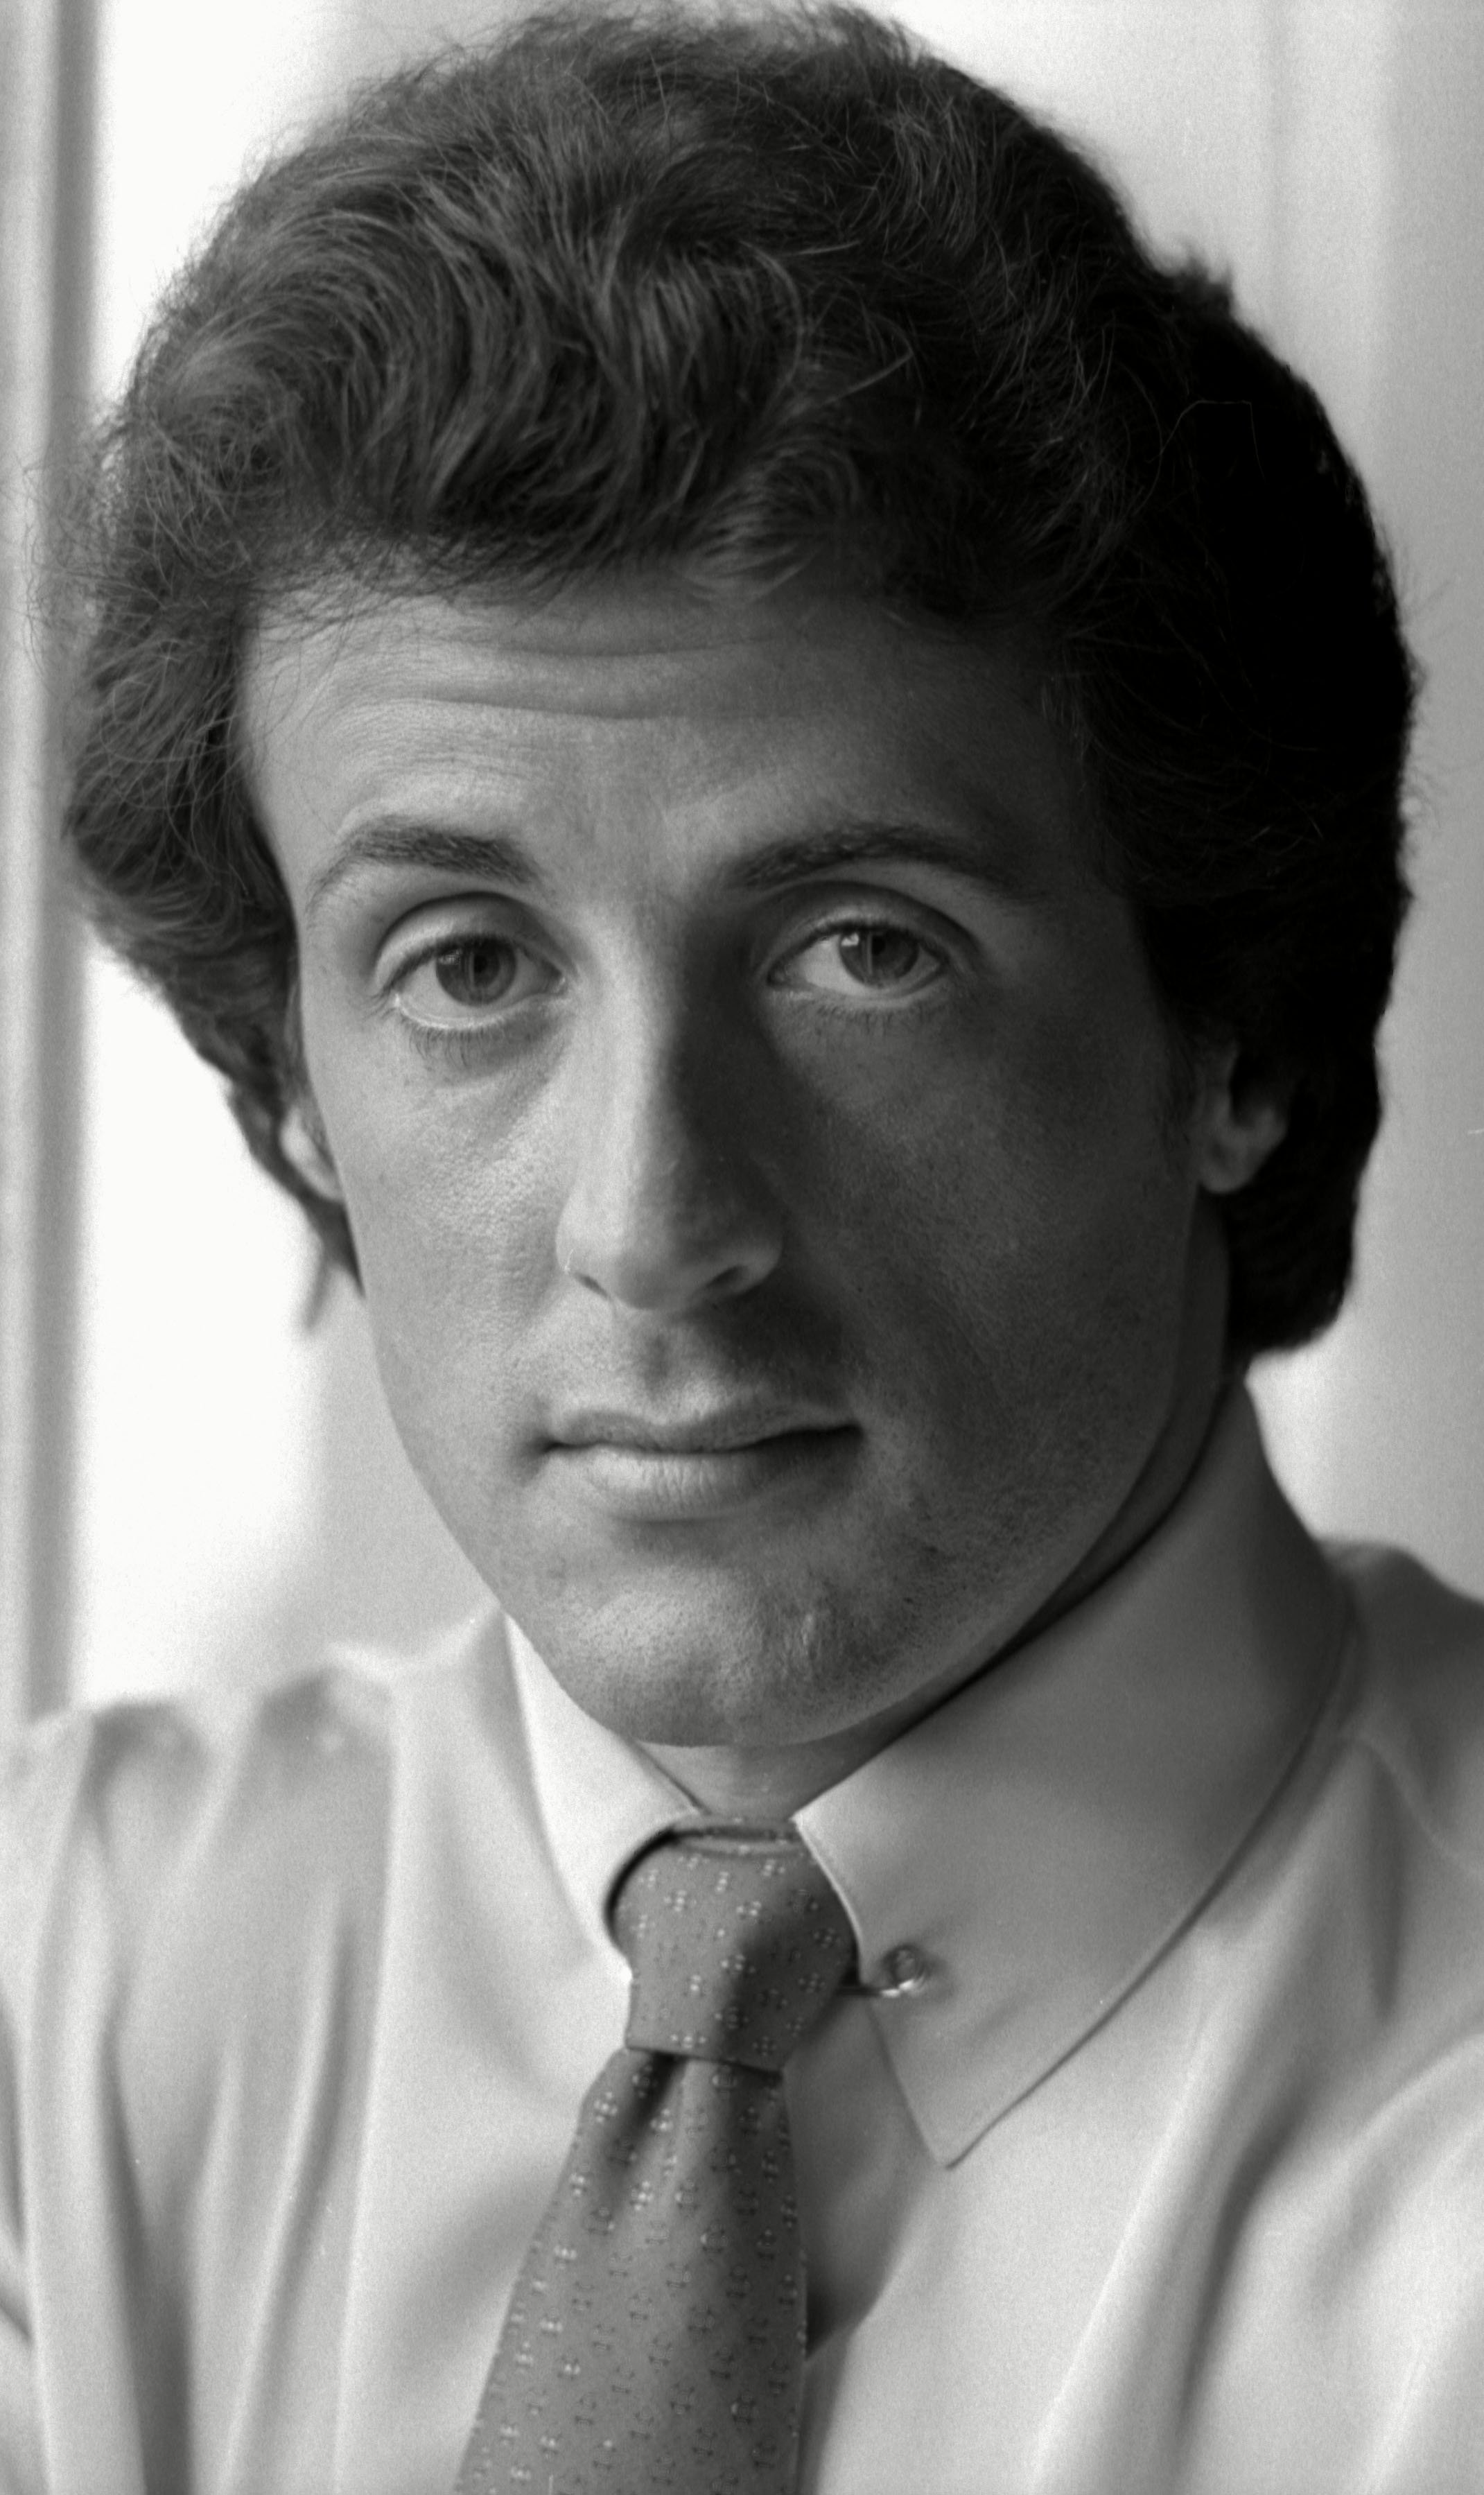 <p>Sylvester Stallone (pictured in 1981) is one of the most instantly recognizable stars in Hollywood. Surely, he wouldn't fiddle with that famous face, right?</p>